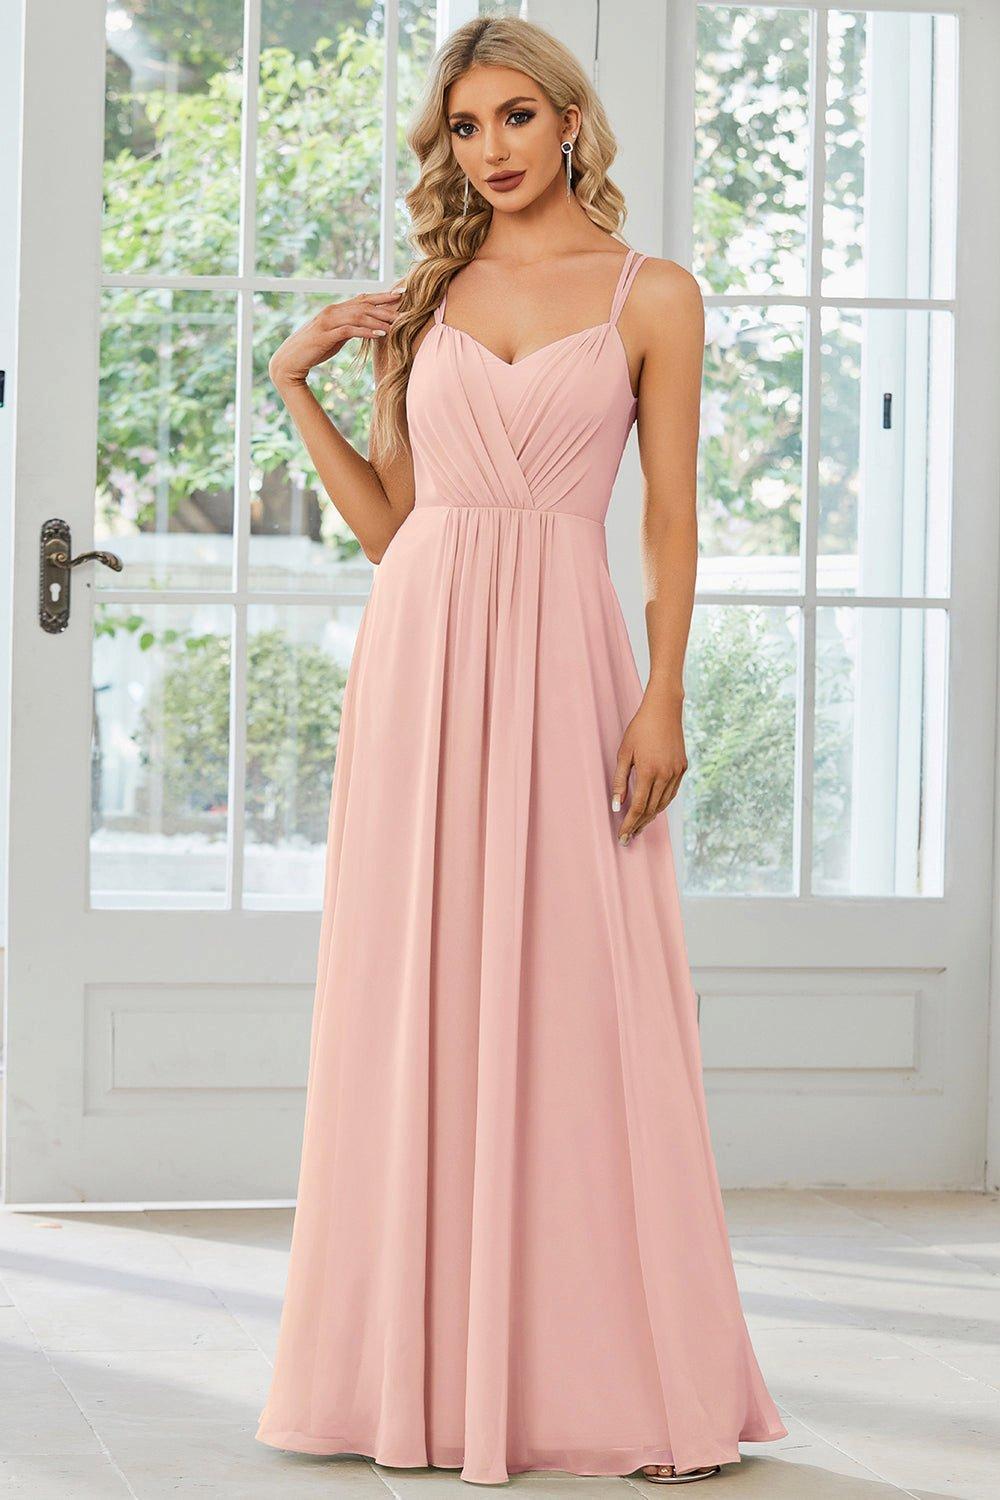 Bridesmaid Dresses: Buy Women's Dresses Online at STACEES